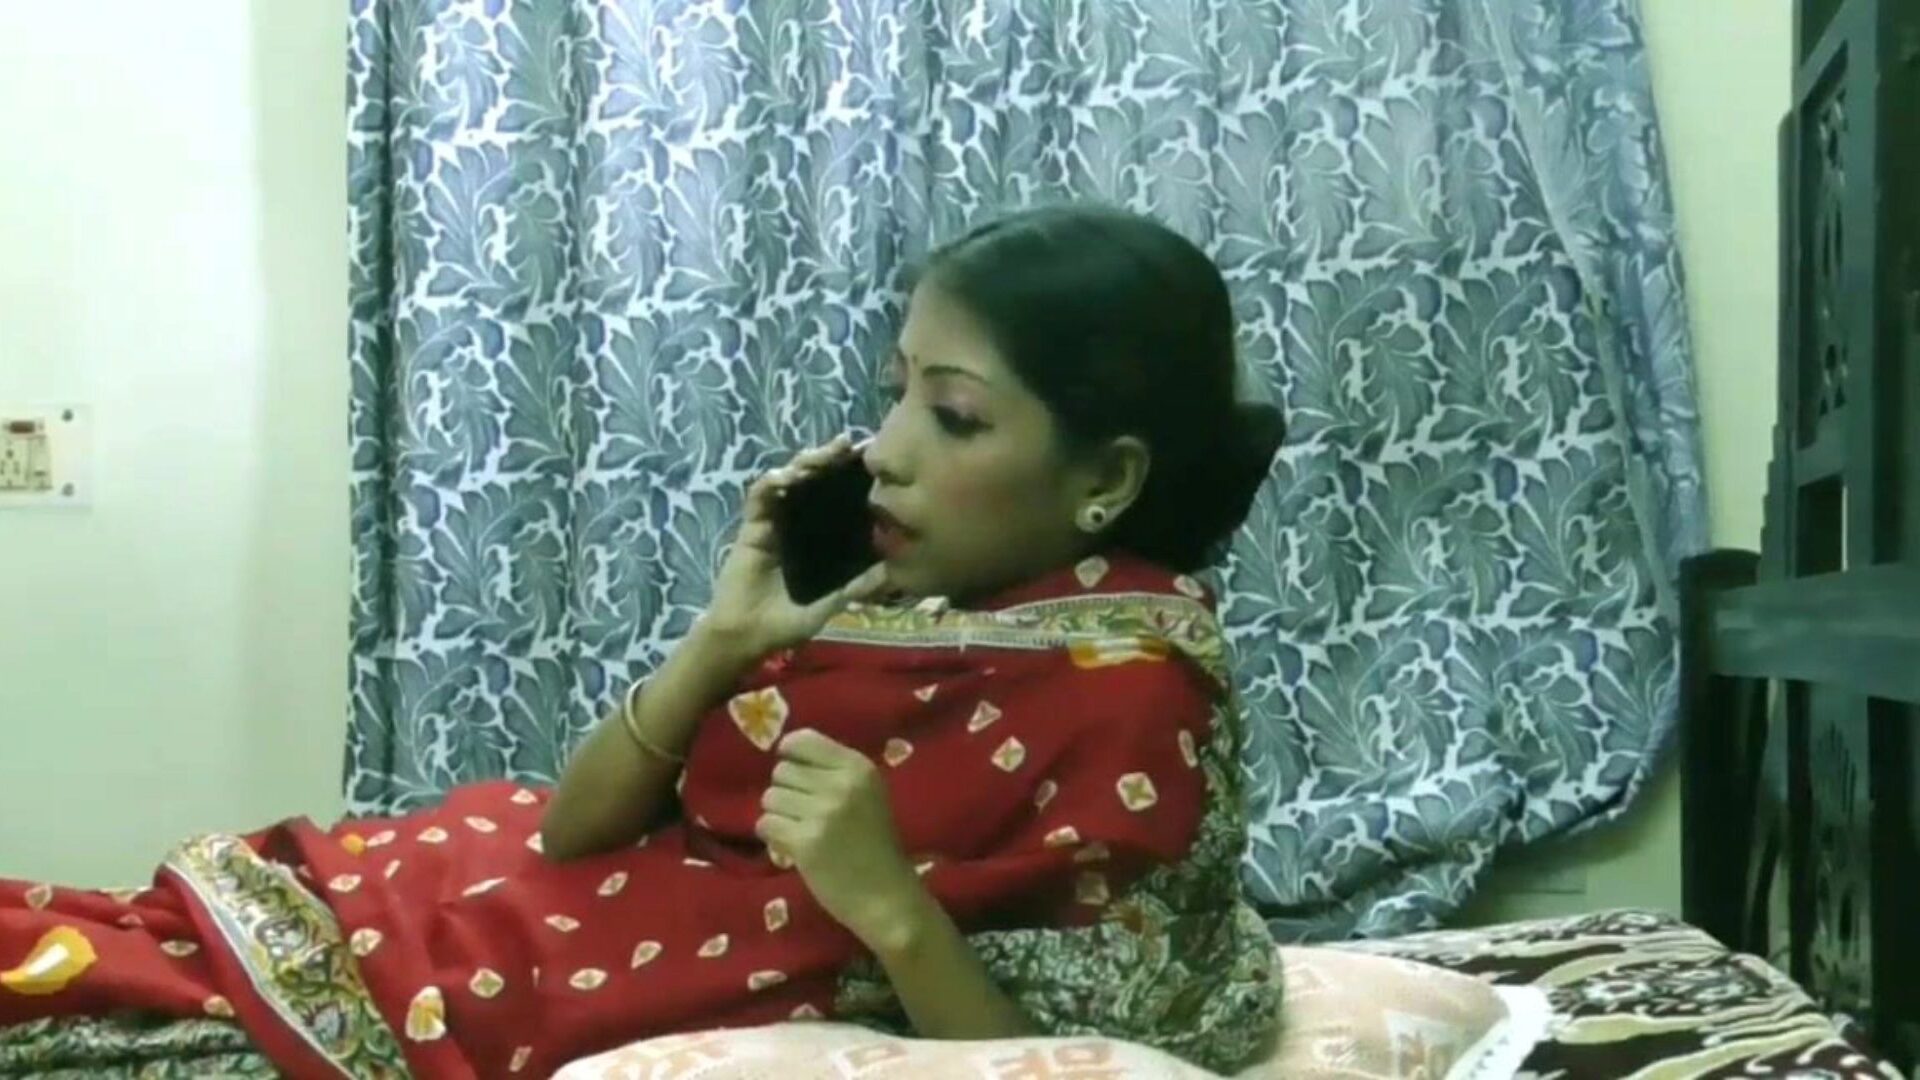 Indian lewd unsatisfied wifey having lovemaking with BA pass caretaker:: With clear Hindi audio